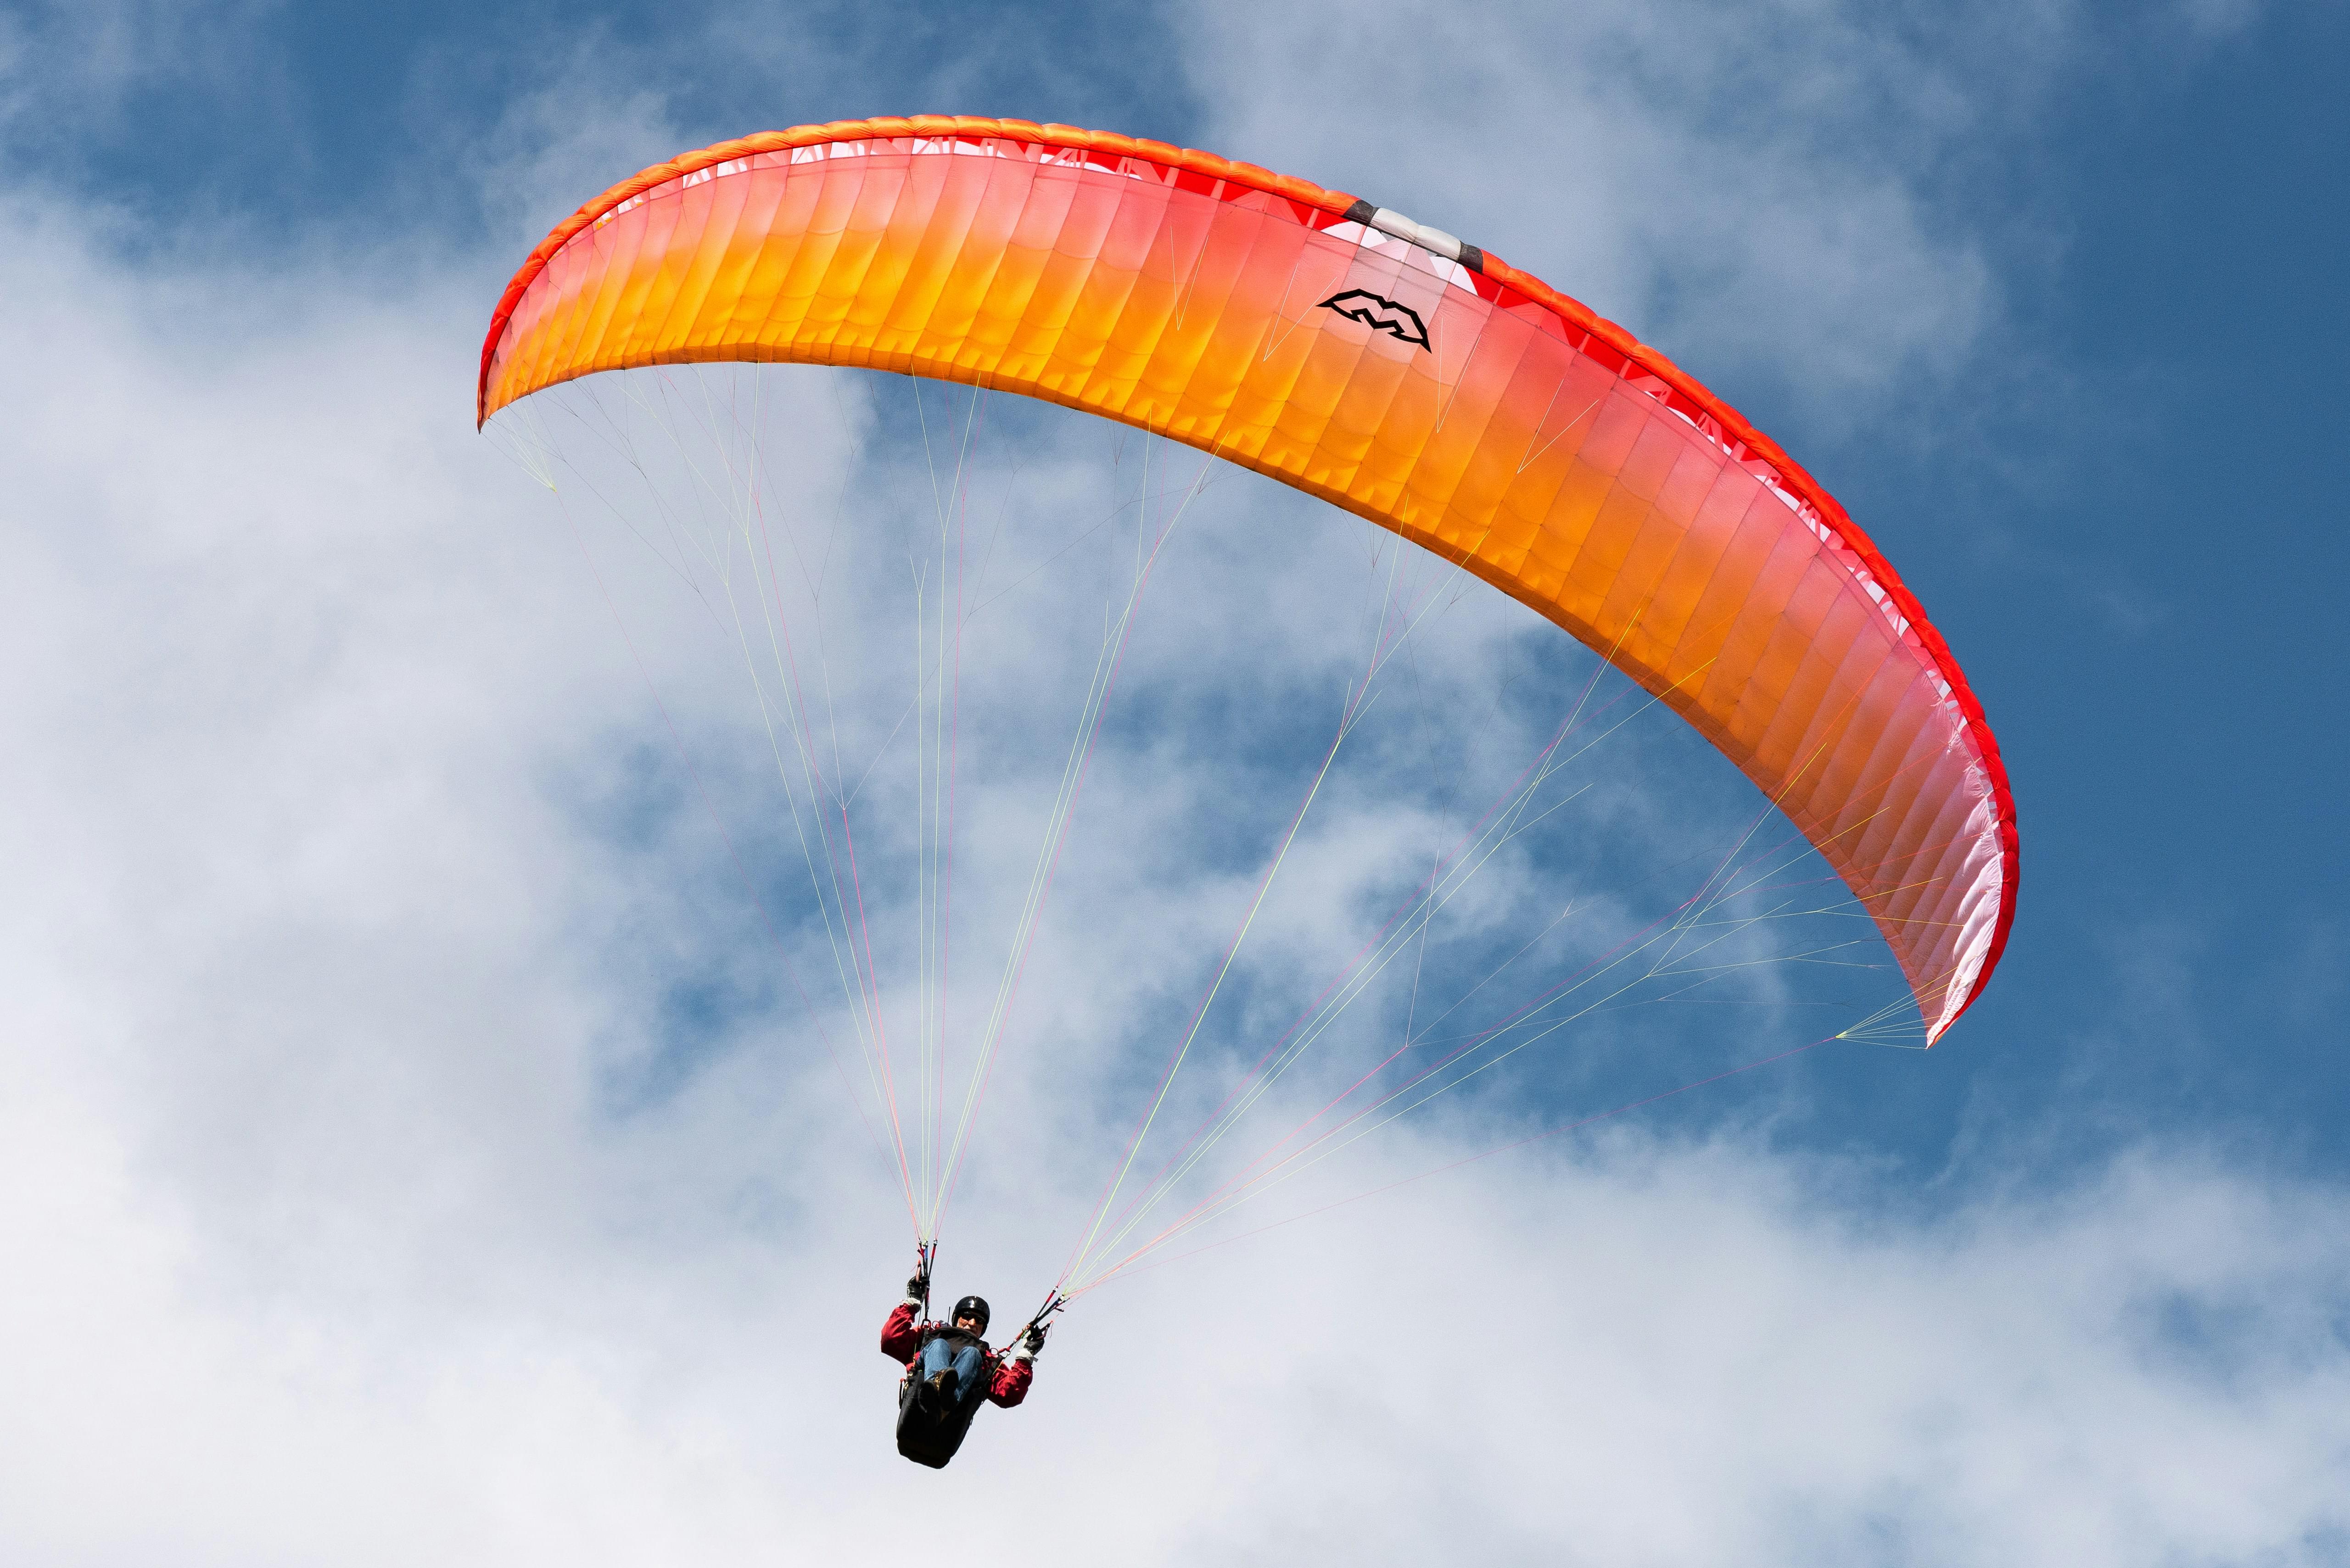 Soar in the skies with a paragliding adventure